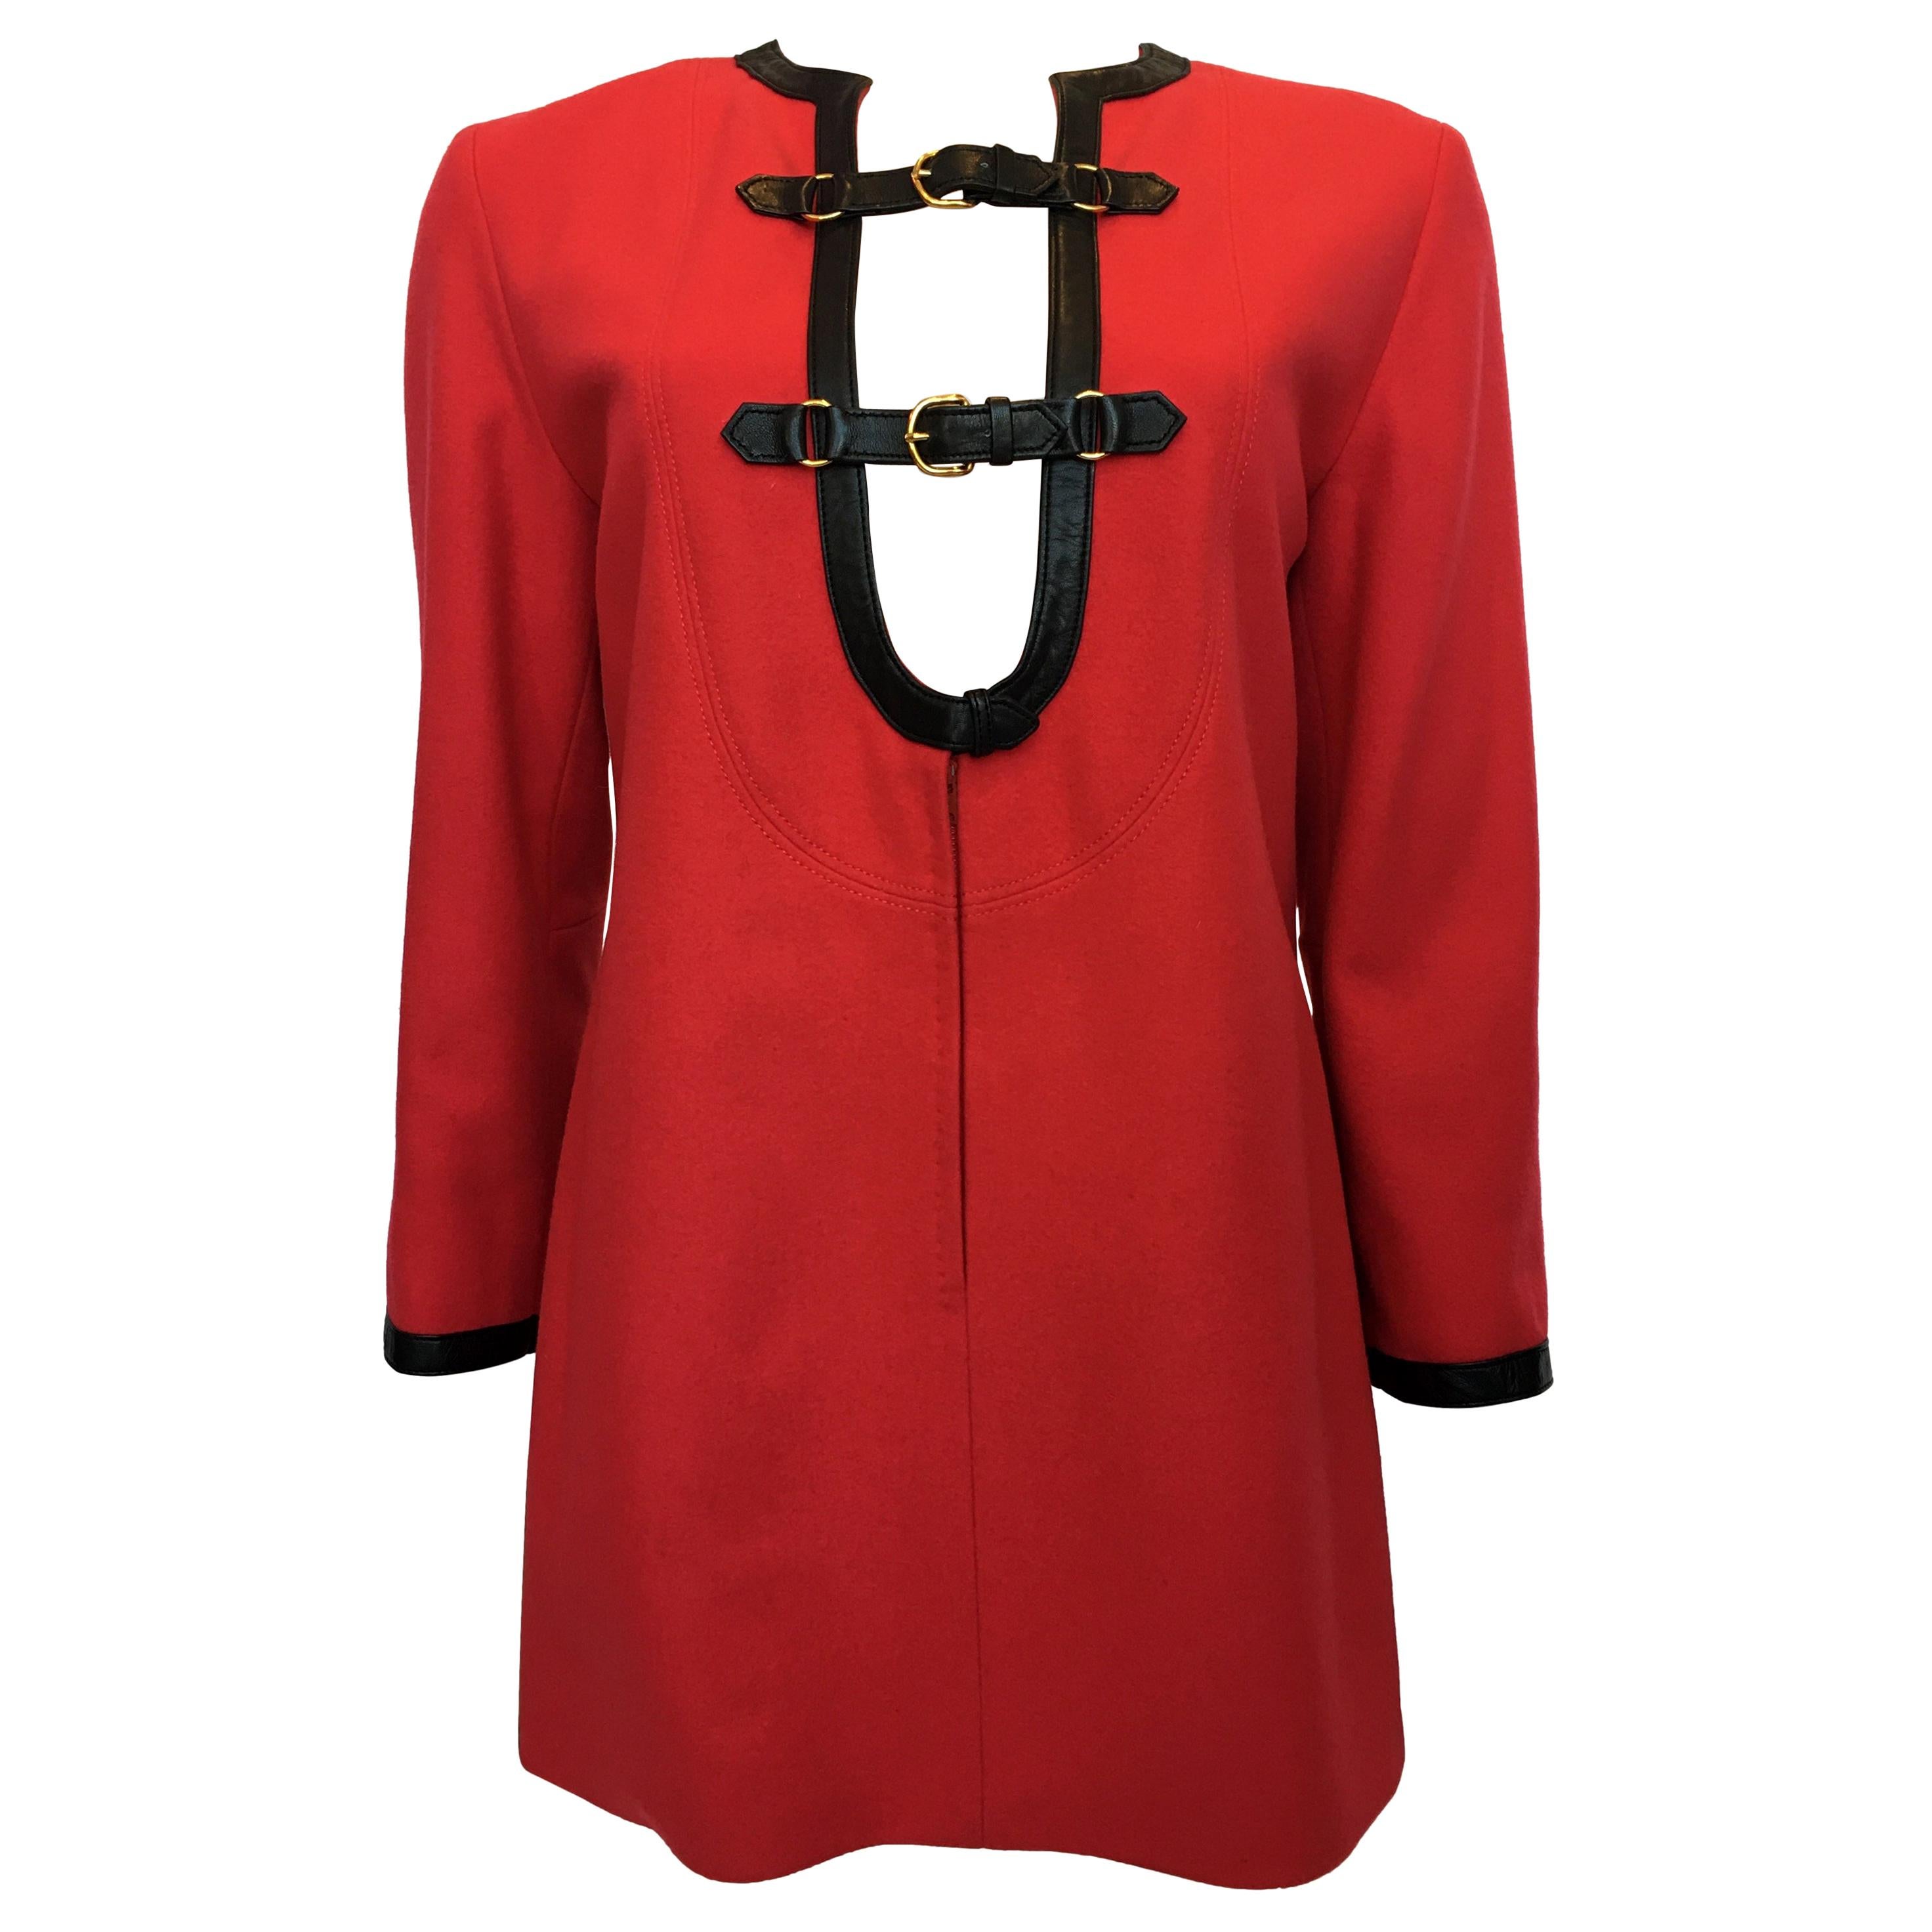 Hermes 1970's Crimson Red Tunic Top with Black Leather Strapping For Sale